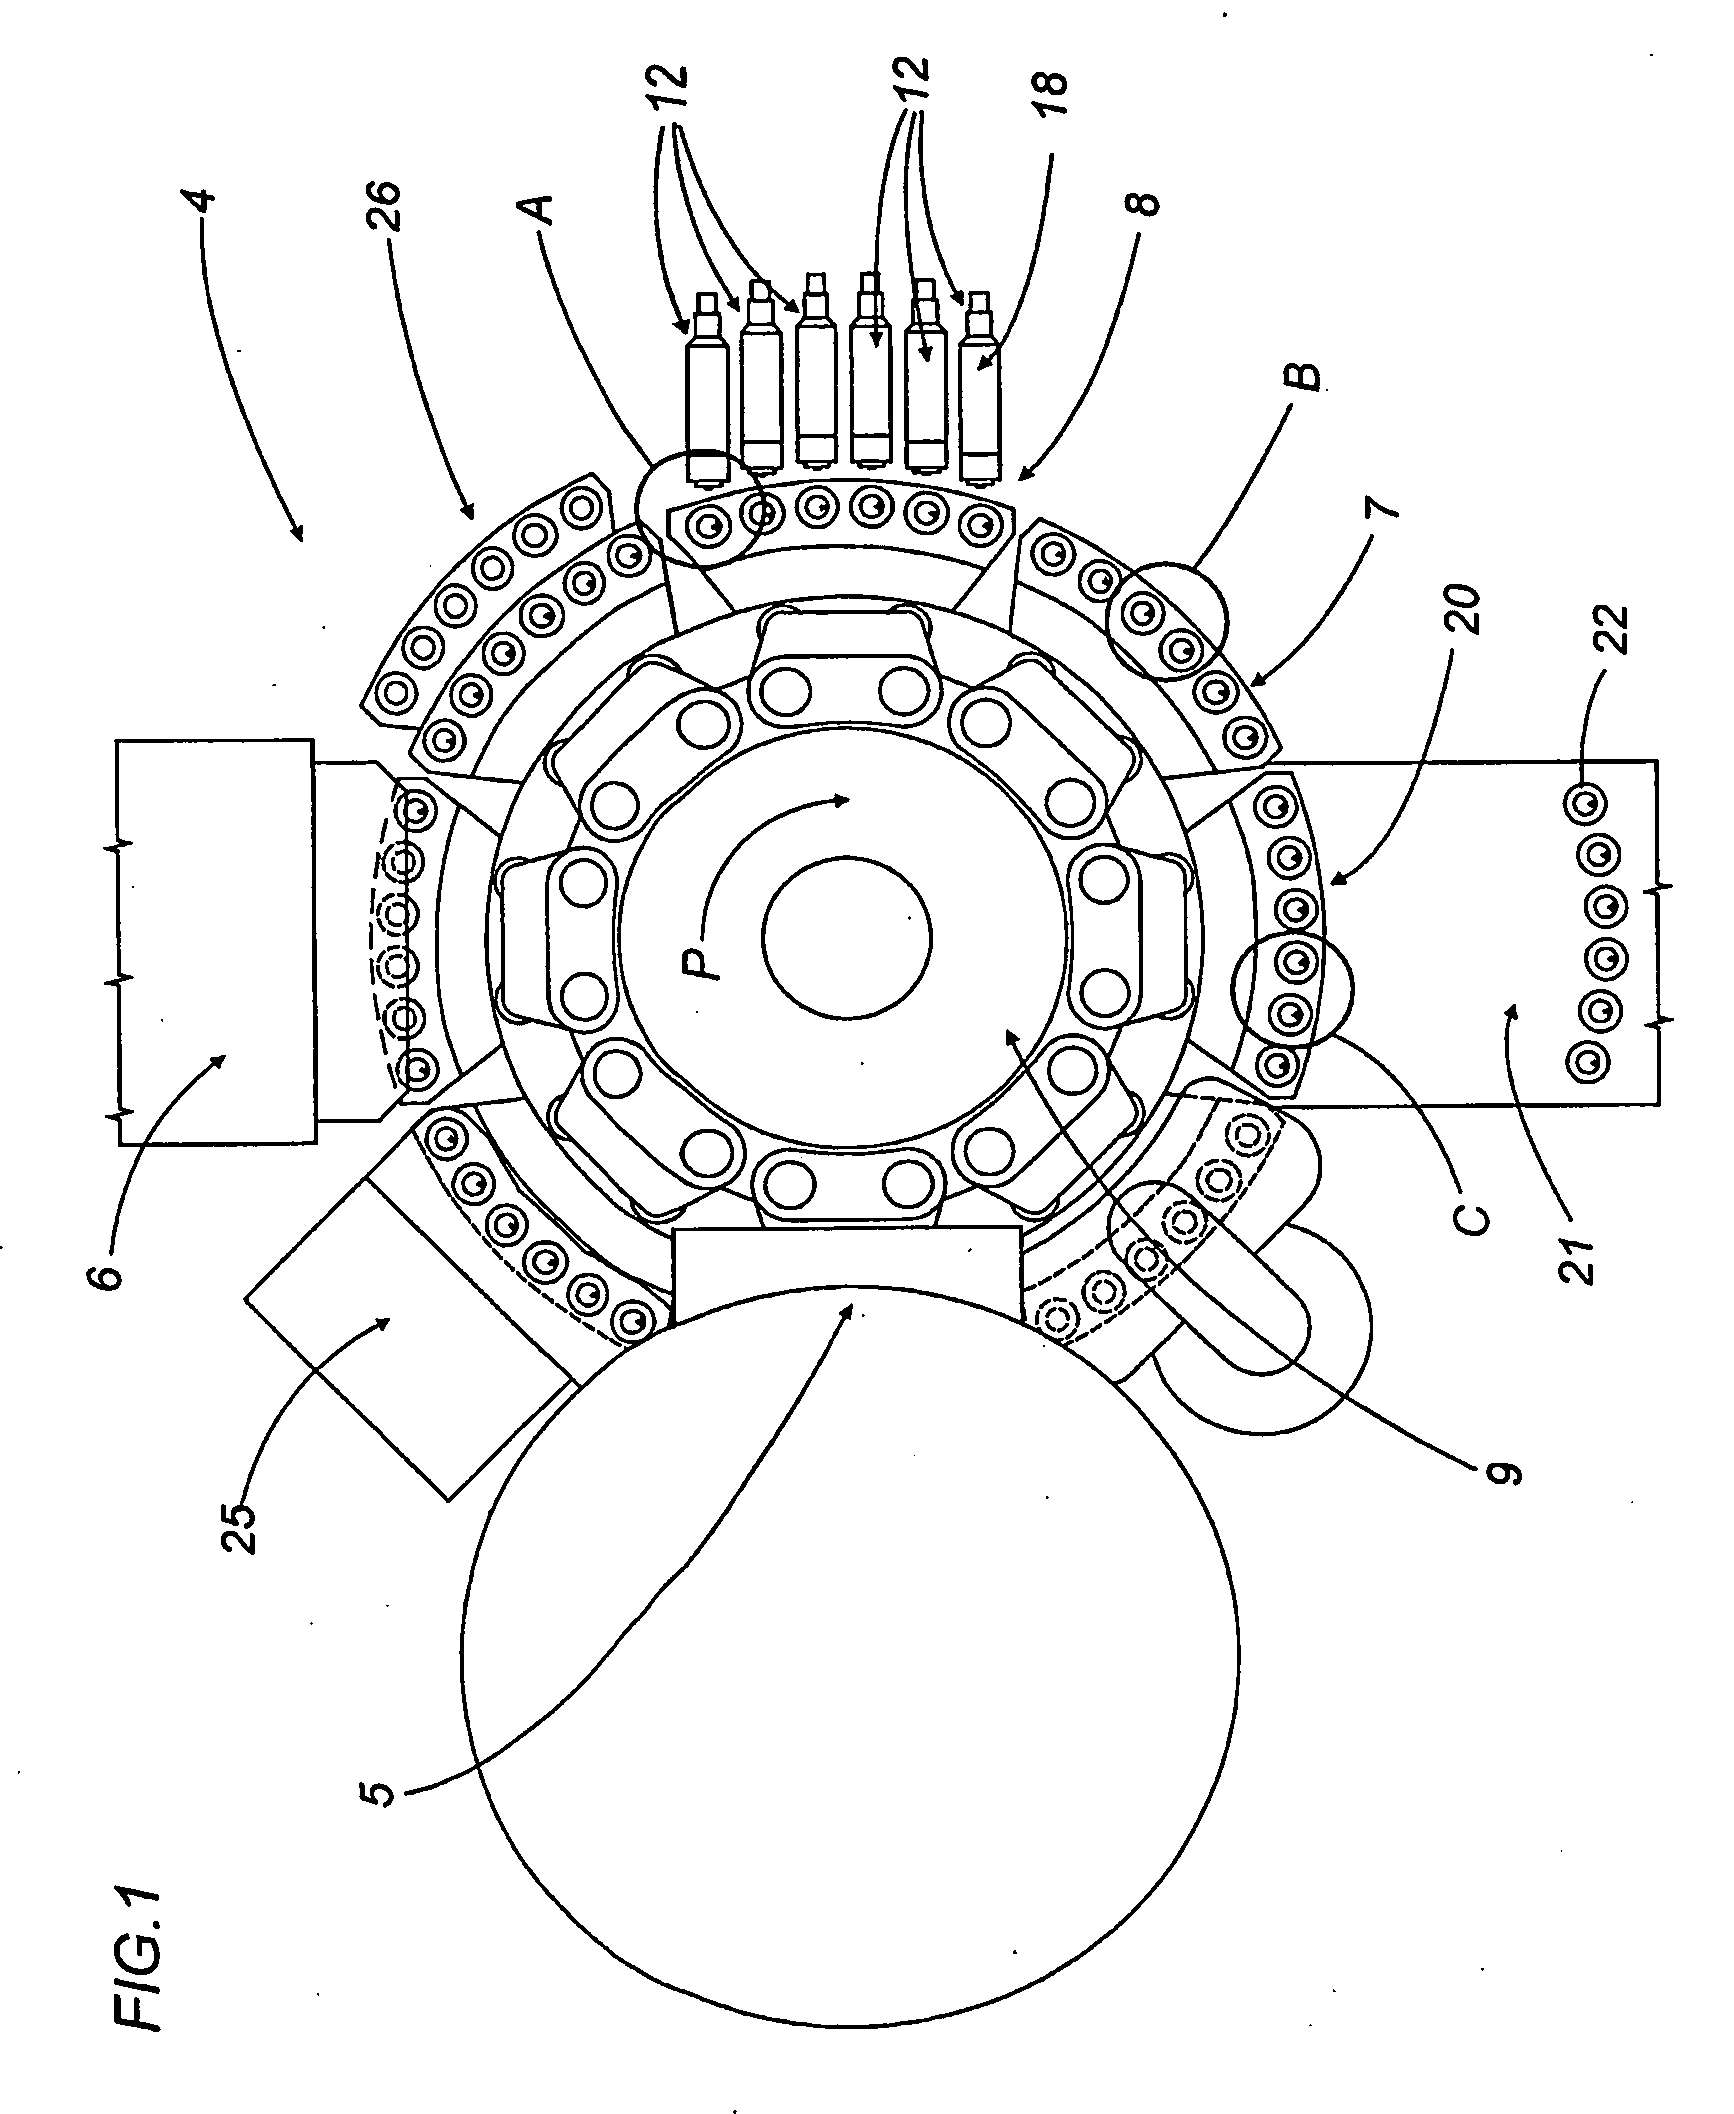 Capsule Filling Machine and Method For Producing Sealed Capsules